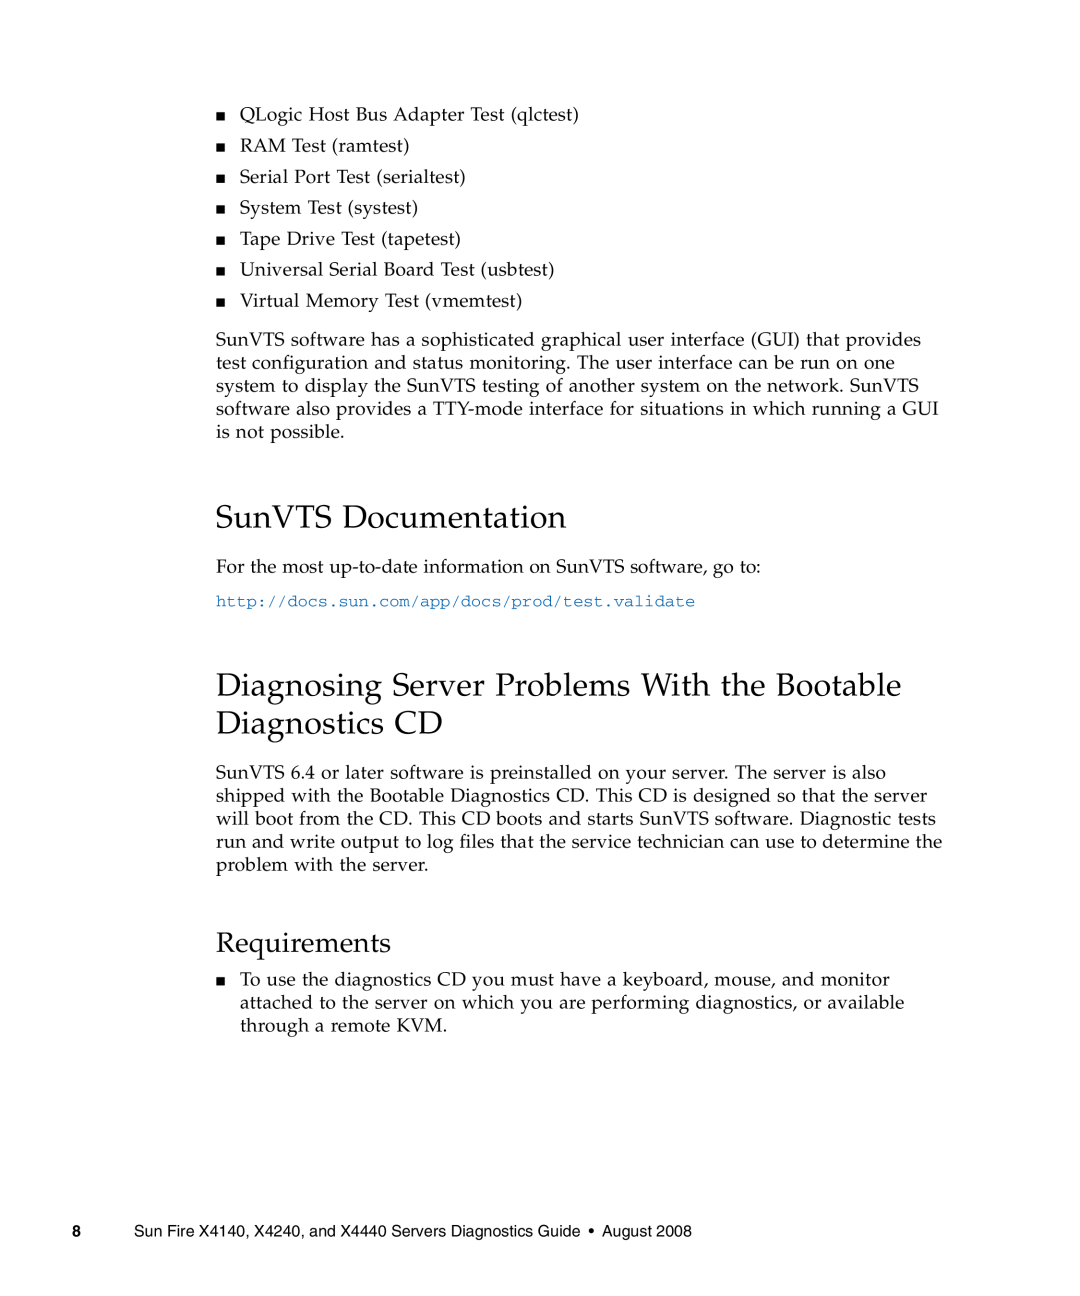 Sun Microsystems X4240 SunVTS Documentation, Diagnosing Server Problems With the Bootable Diagnostics CD, Requirements 